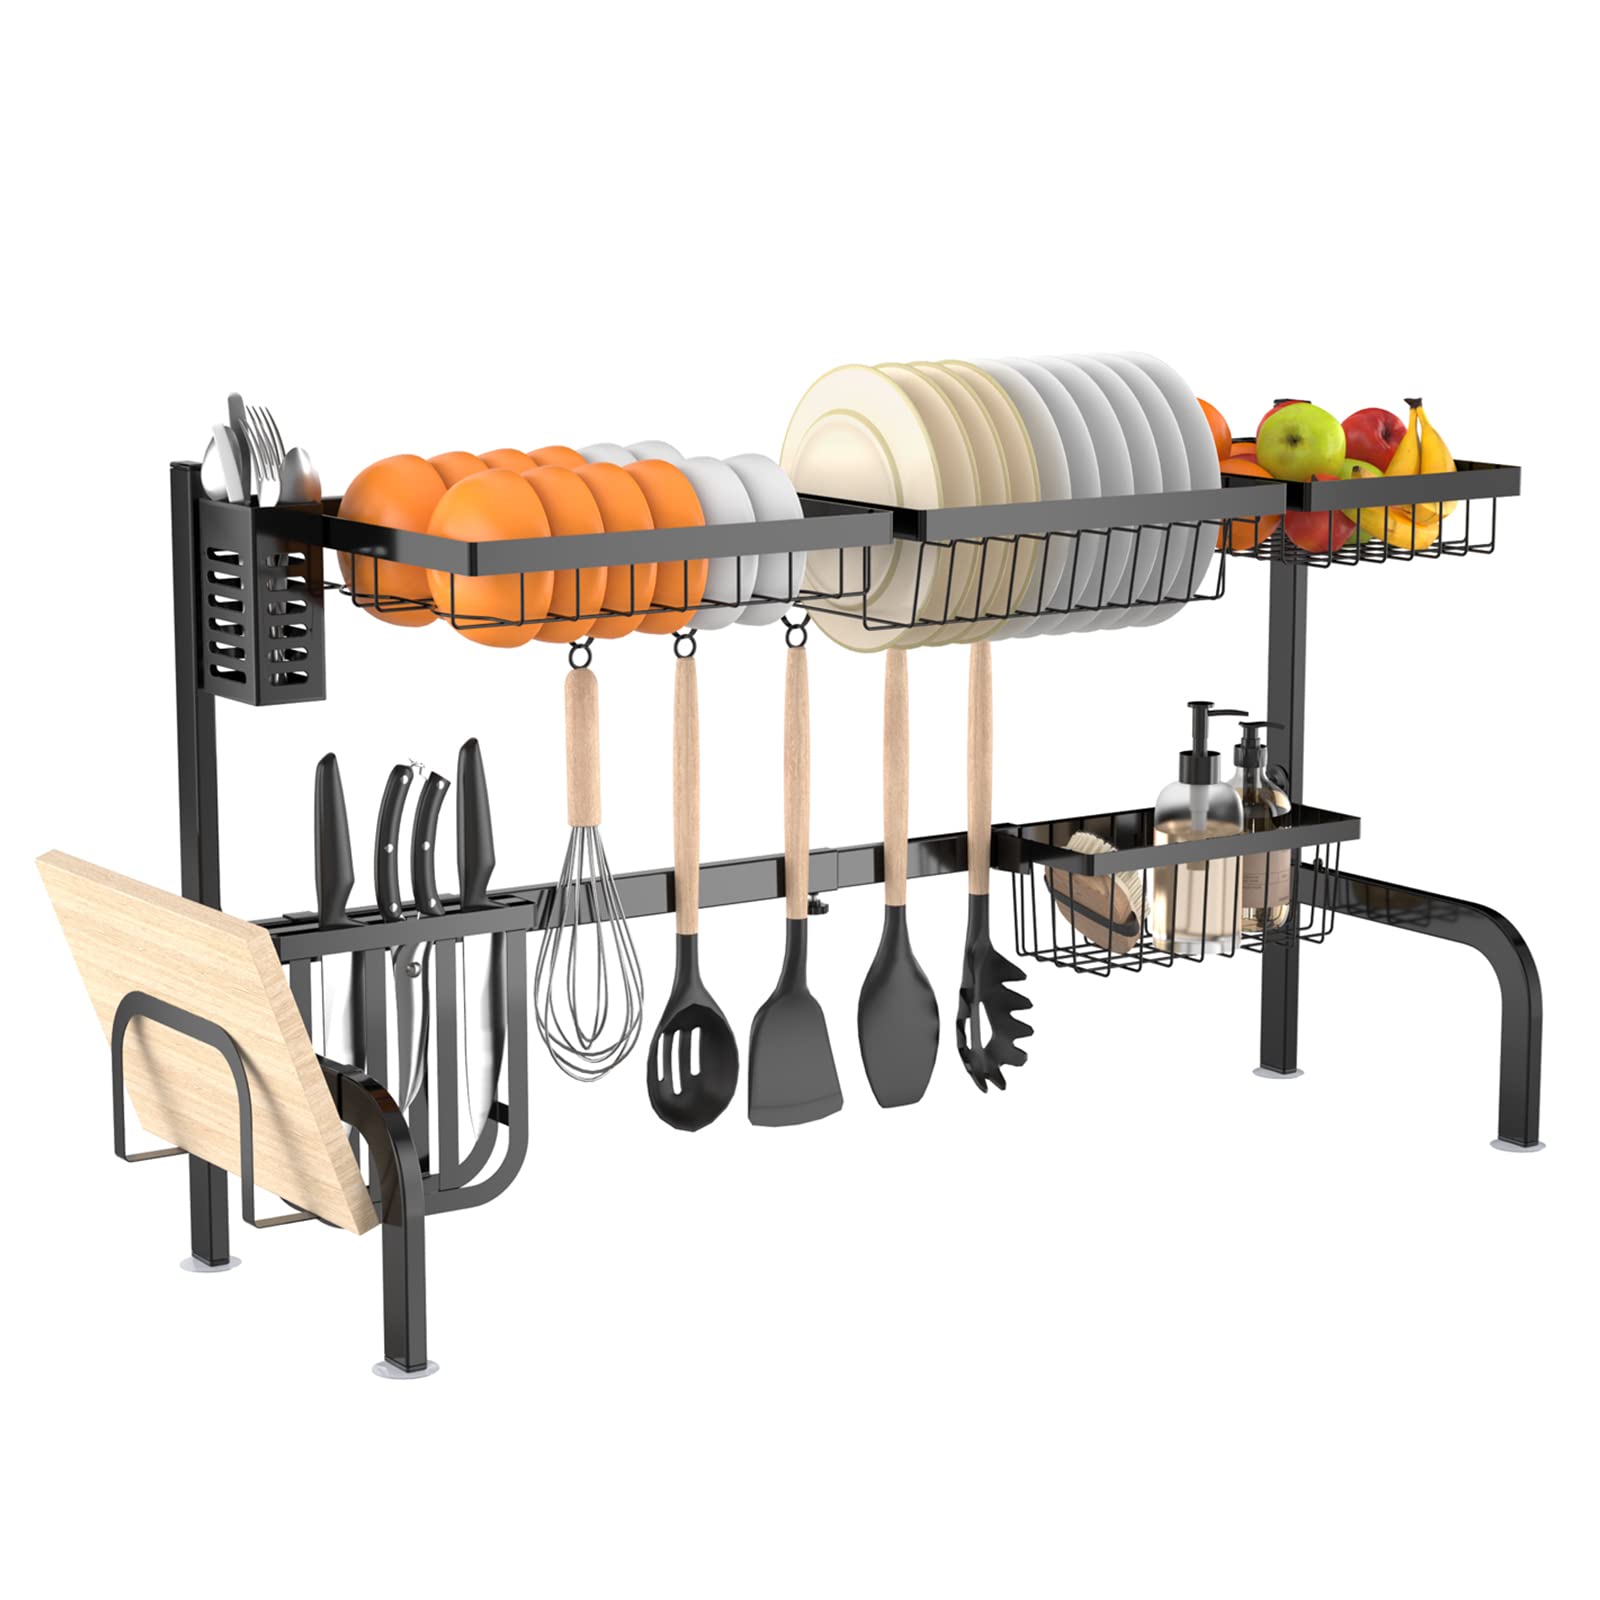 Dish Drying Rack with Drainboard Dish Drainers for Kitchen Counter Sink  Adjustable Spout Dish Strainers with Utensil Holder and Knife Slots, Black  